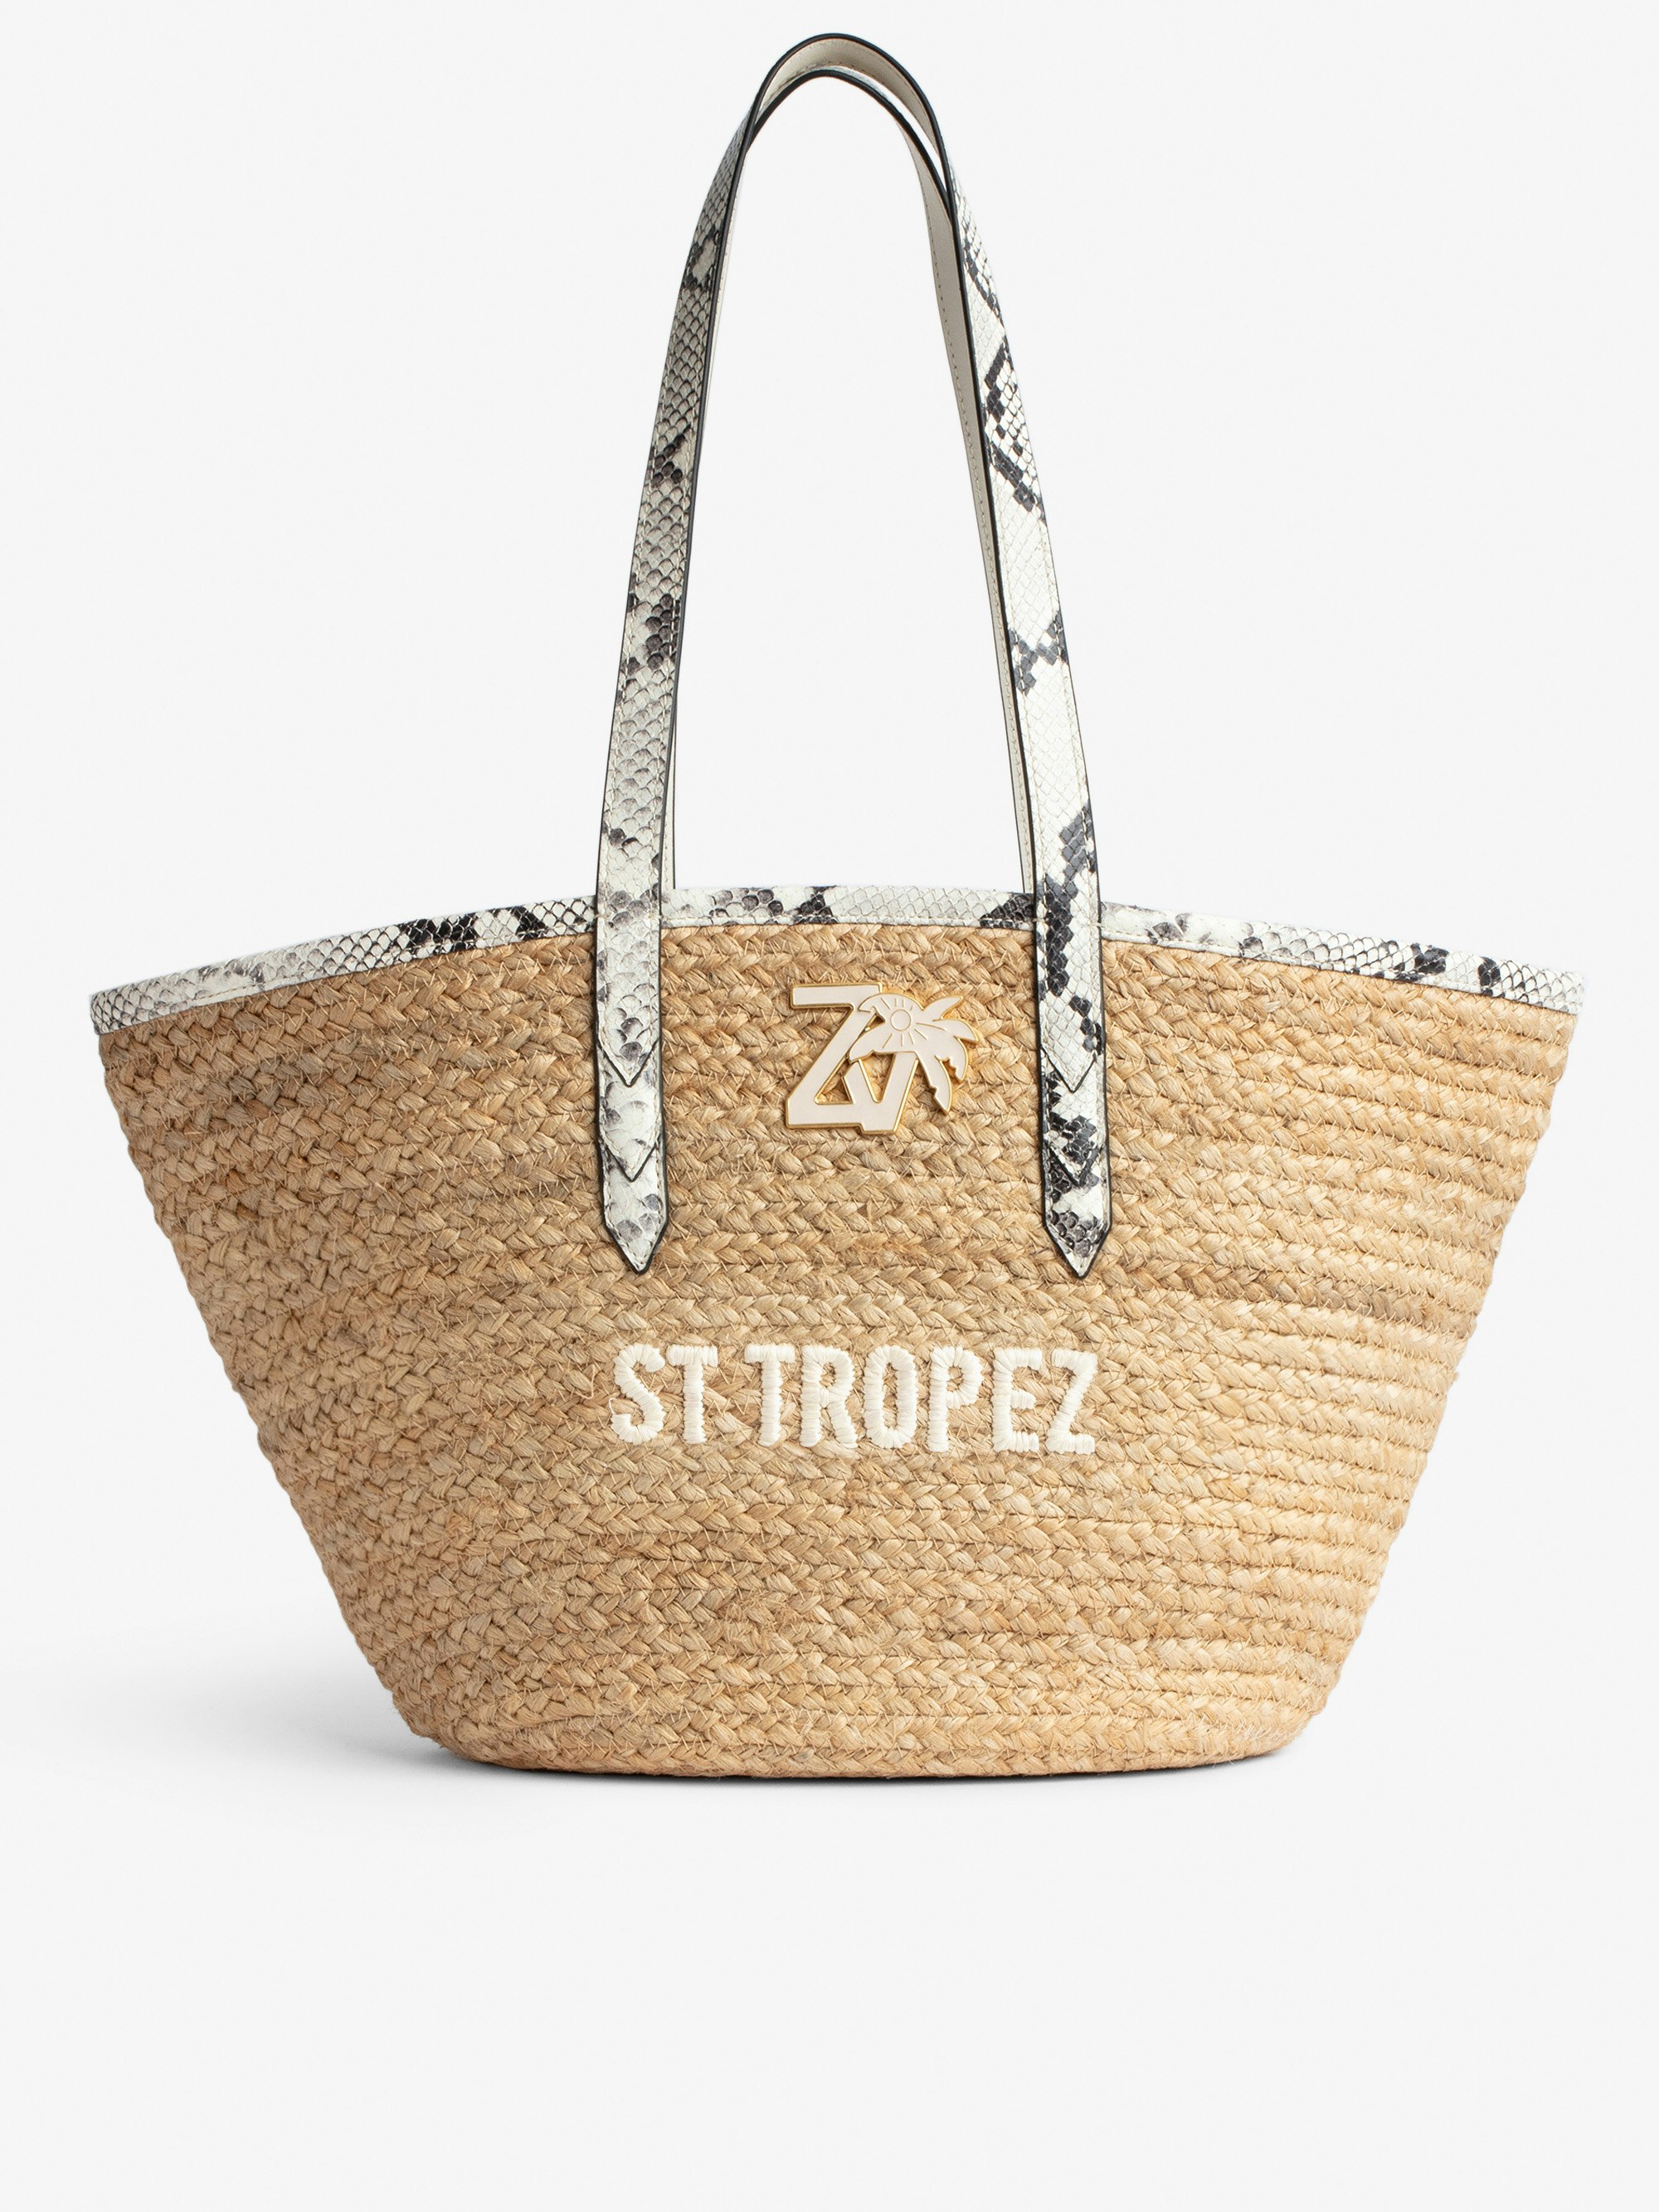 Le Beach Bag - Women's straw bag with off-white snakeskin-effect leather handles, "St Tropez" embroidery and ZV charm